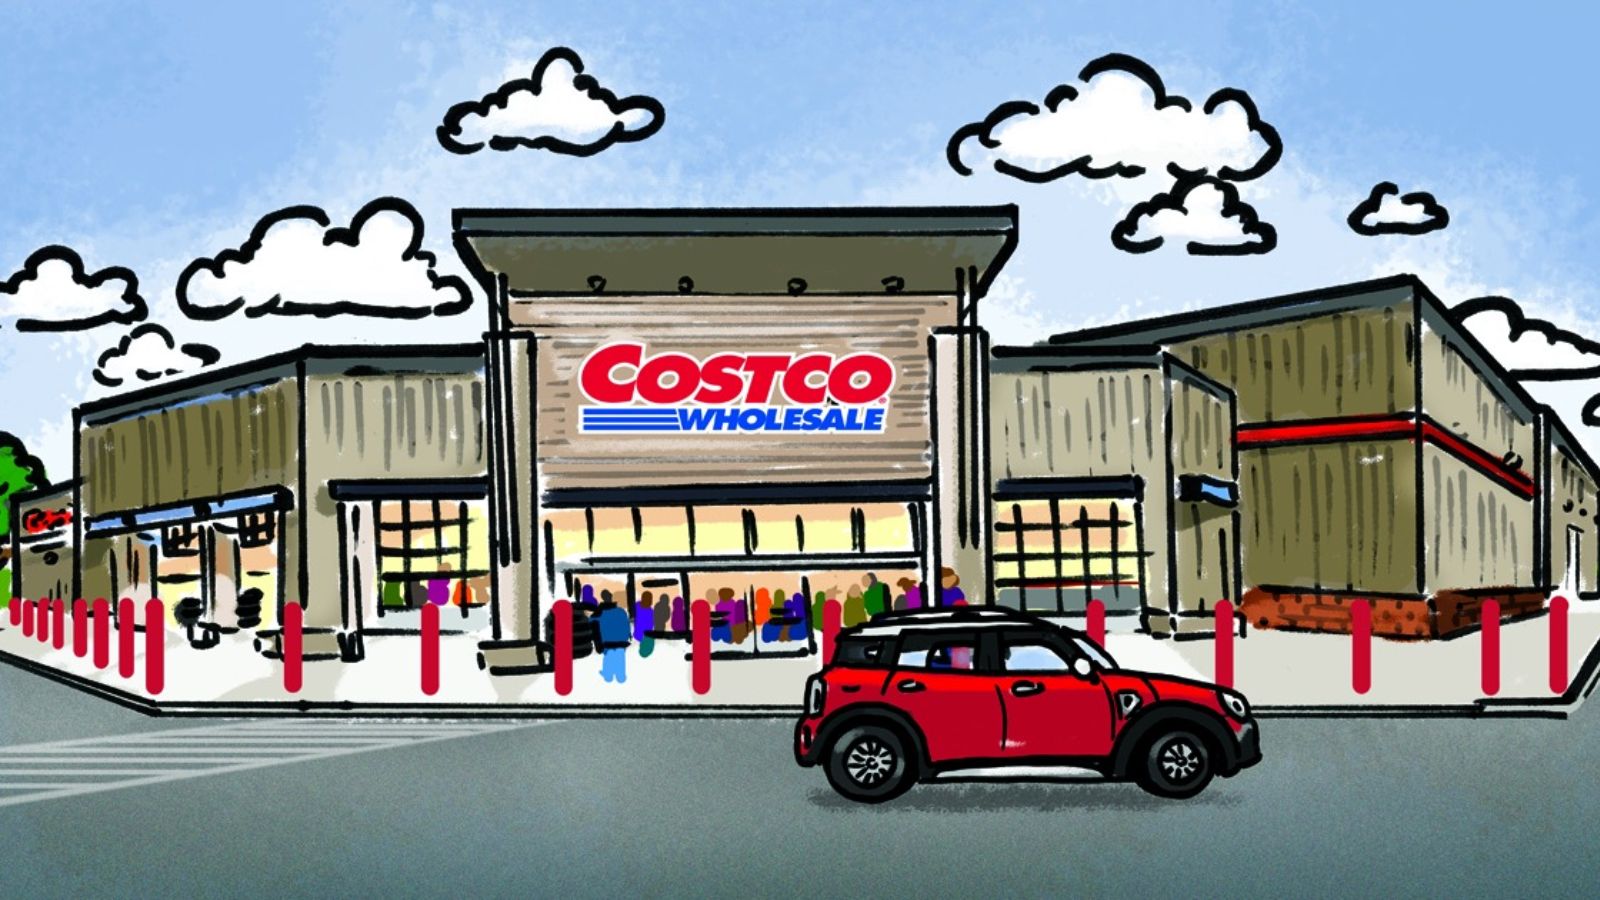 Costco: Get $75 in Costco Cash by purchasing $500  online (select items